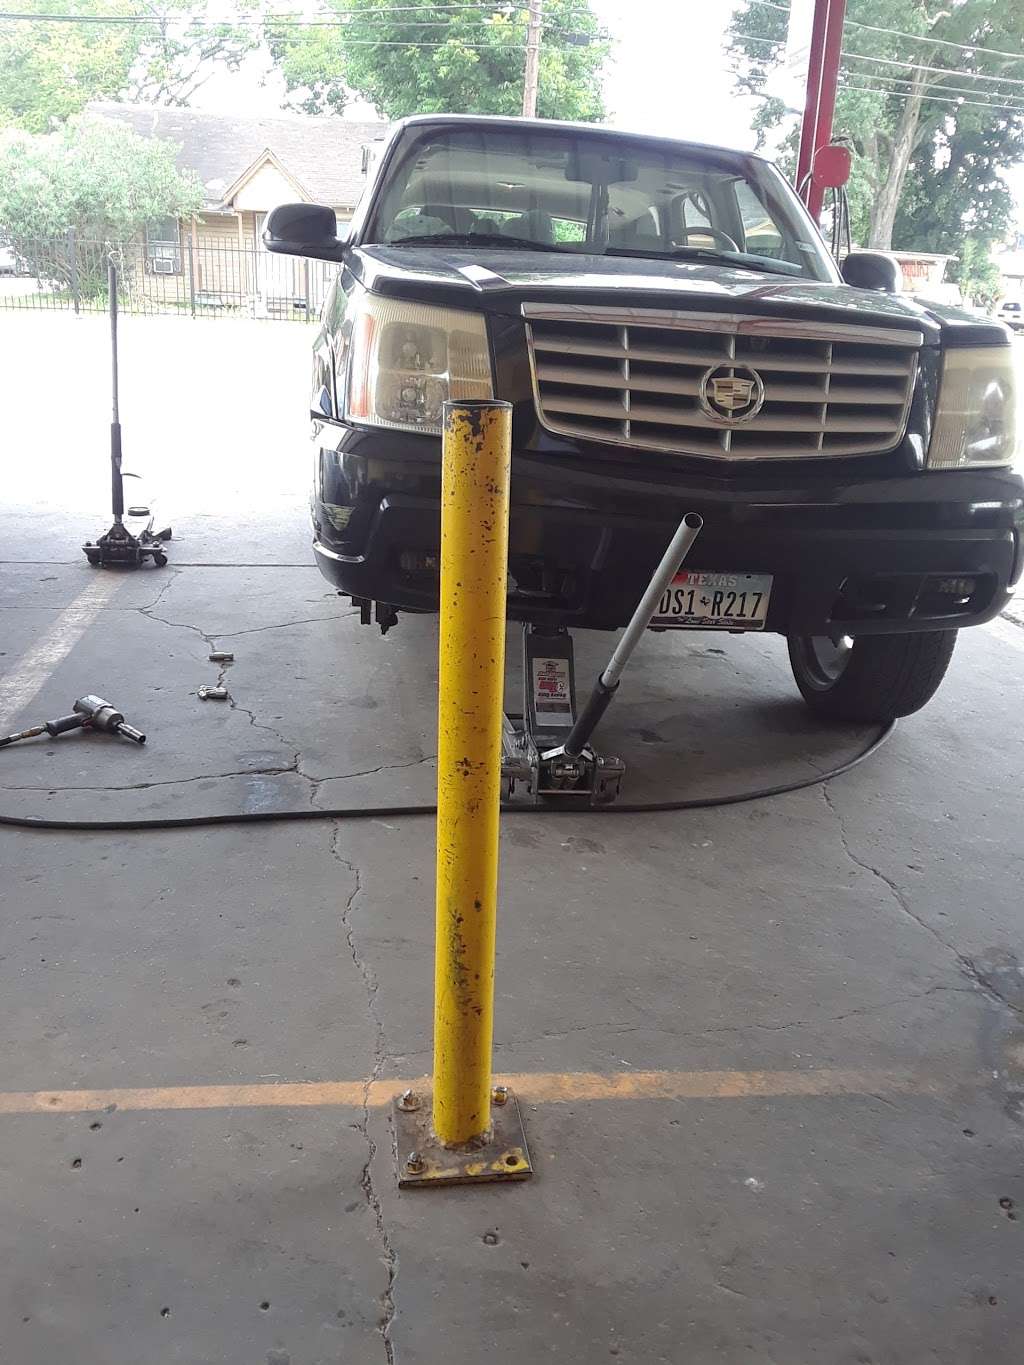 Big One Tire Shop & Services | 3403 Laura Koppe Rd, Houston, TX 77093 | Phone: (713) 694-0693